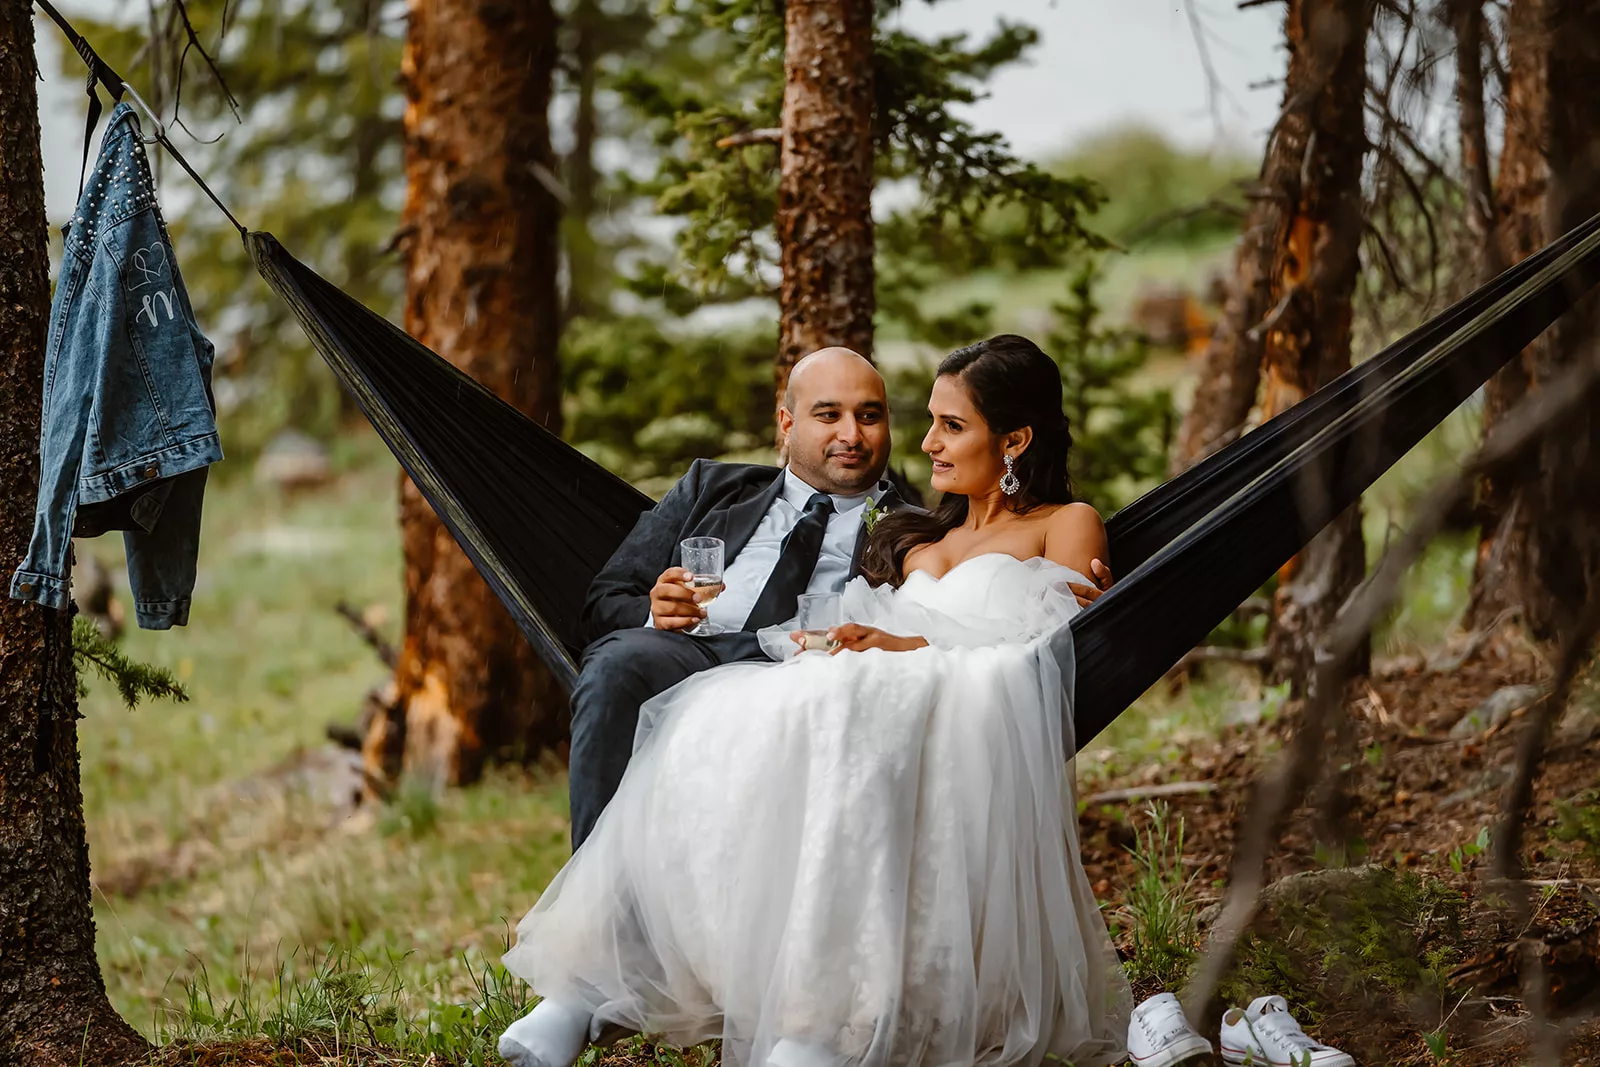 A bride and groom hammock during their Colorado elopement ceremony.